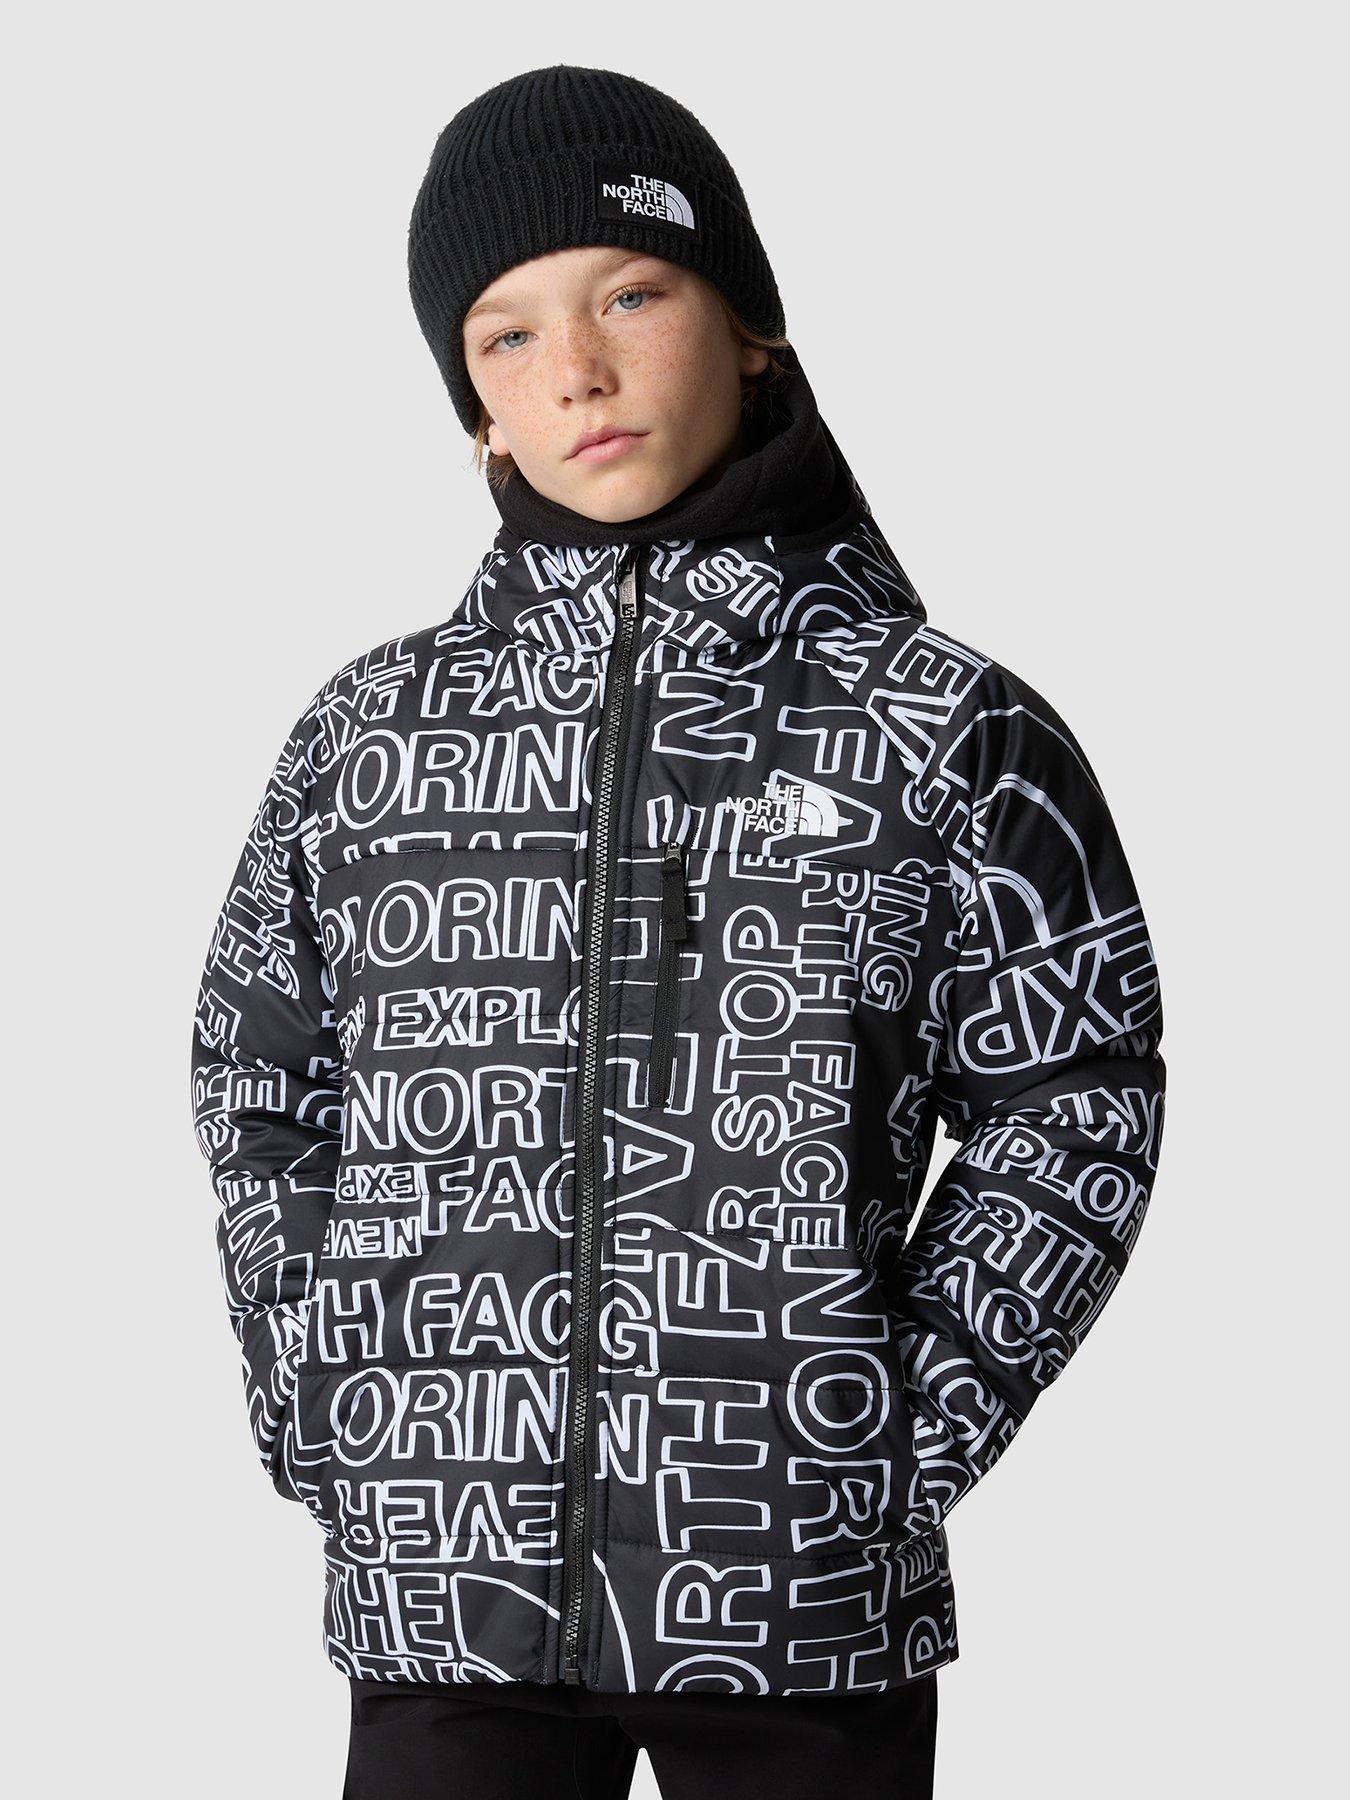 THE NORTH FACE】90´s EXTREME GEAR A-1252-